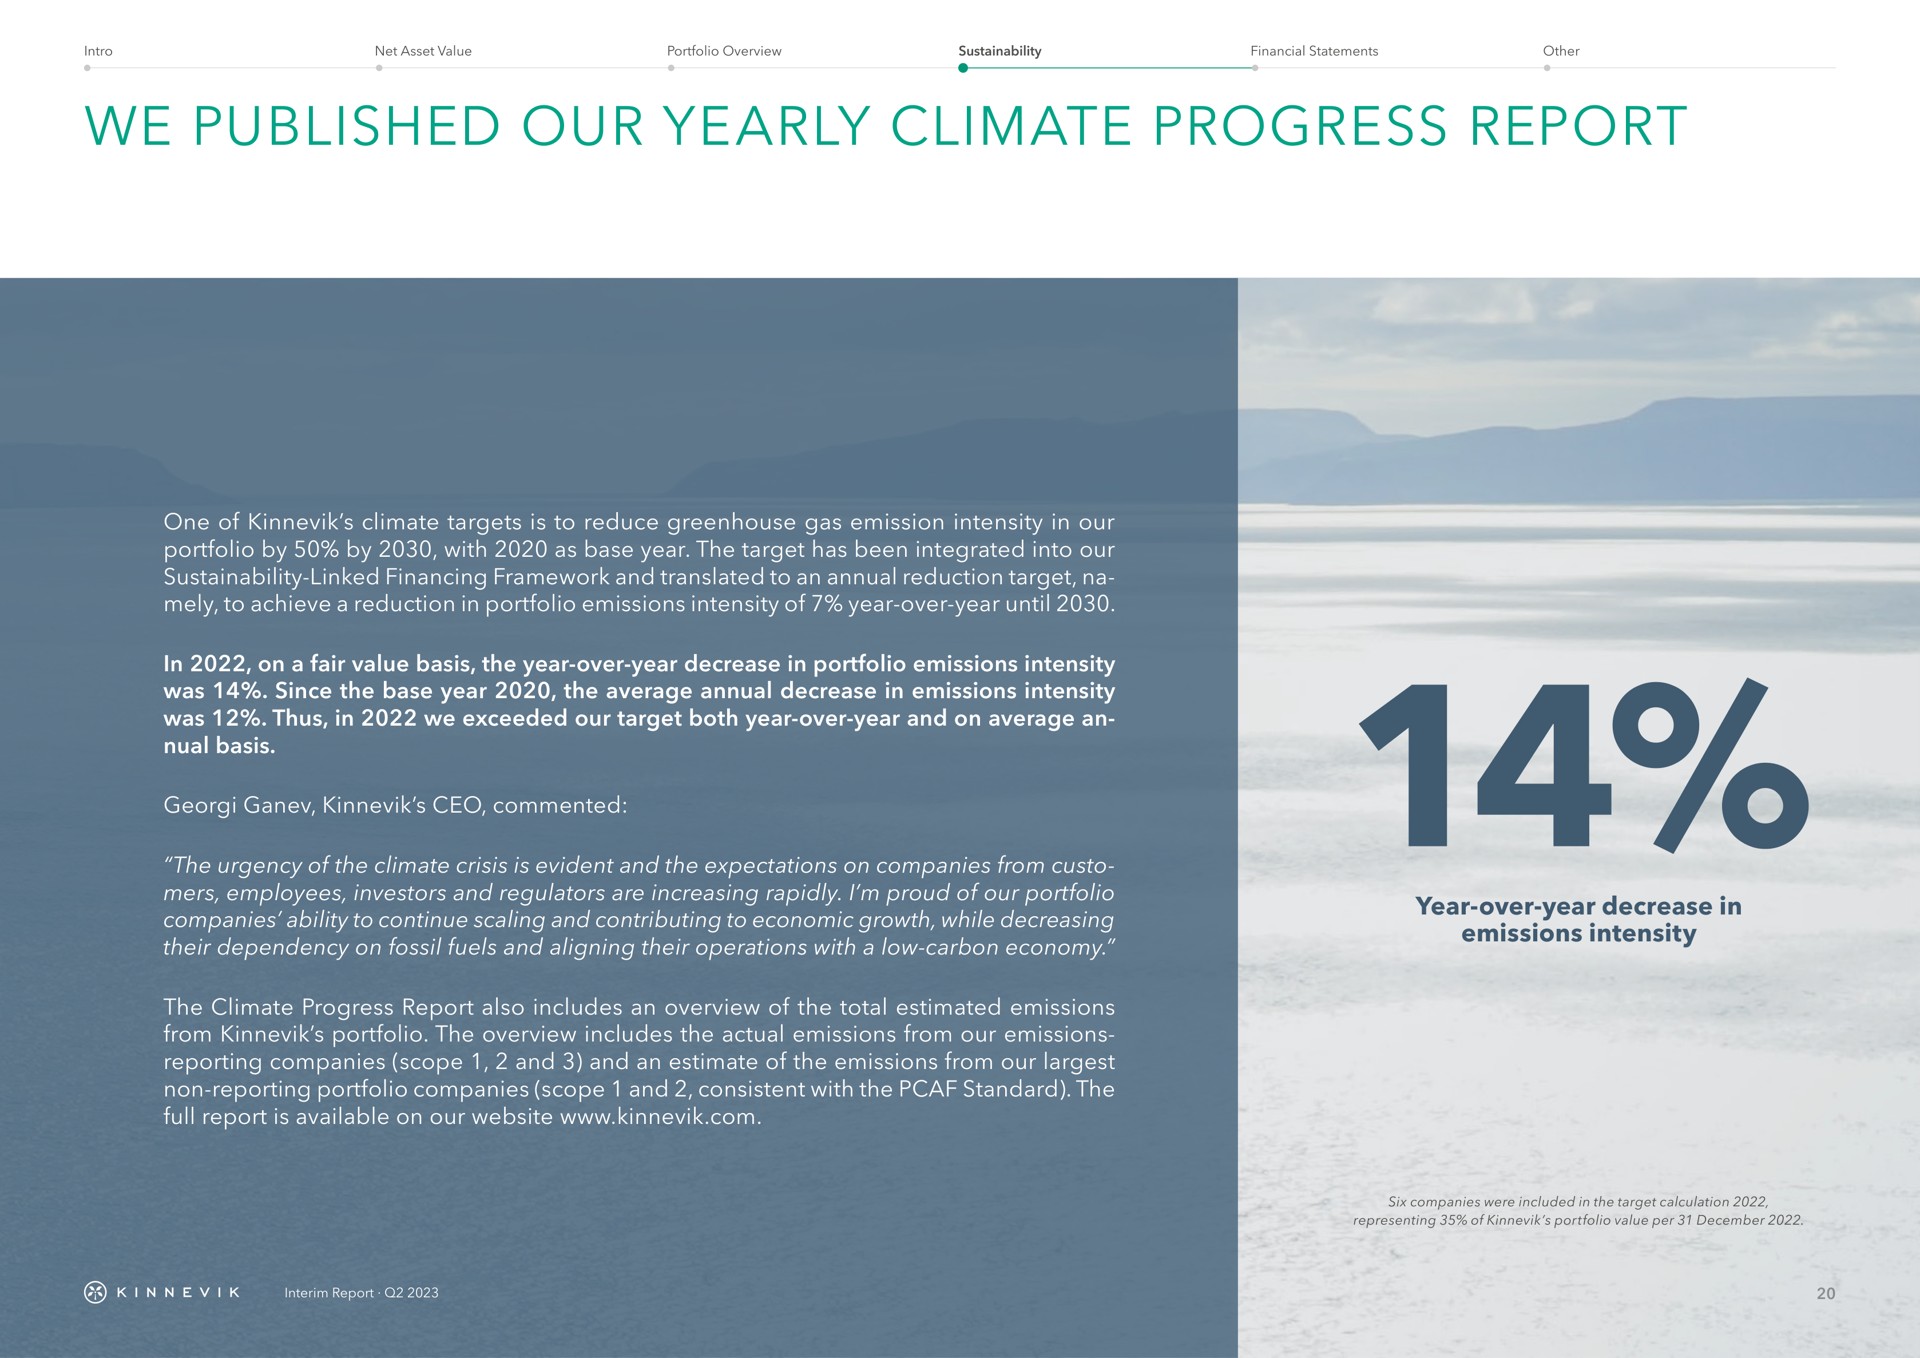 we published our yearly climate progress report one of climate targets is to reduce greenhouse gas emission intensity in our portfolio by by with as base year the target has been integrated into our linked financing framework and translated to an annual reduction target to achieve a reduction in portfolio emissions intensity of year over year until in on a fair value basis the year over year decrease in portfolio emissions intensity was since the base year the average annual decrease in emissions intensity was thus in we exceeded our target both year over year and on average an basis commented the urgency of the climate crisis is evident and the expectations on companies from employees investors and regulators are increasing rapidly i of our portfolio companies ability to continue scaling and contributing to economic growth while decreasing their dependency on fossil fuels and aligning their operations with a low carbon economy the climate progress report also includes an overview of the total estimated emissions from portfolio the overview includes the actual emissions from our emissions reporting companies scope and and an estimate of the emissions from our non reporting portfolio companies scope and consistent with the standard the full report is available on our year over year decrease in emissions intensity eke yen | Kinnevik